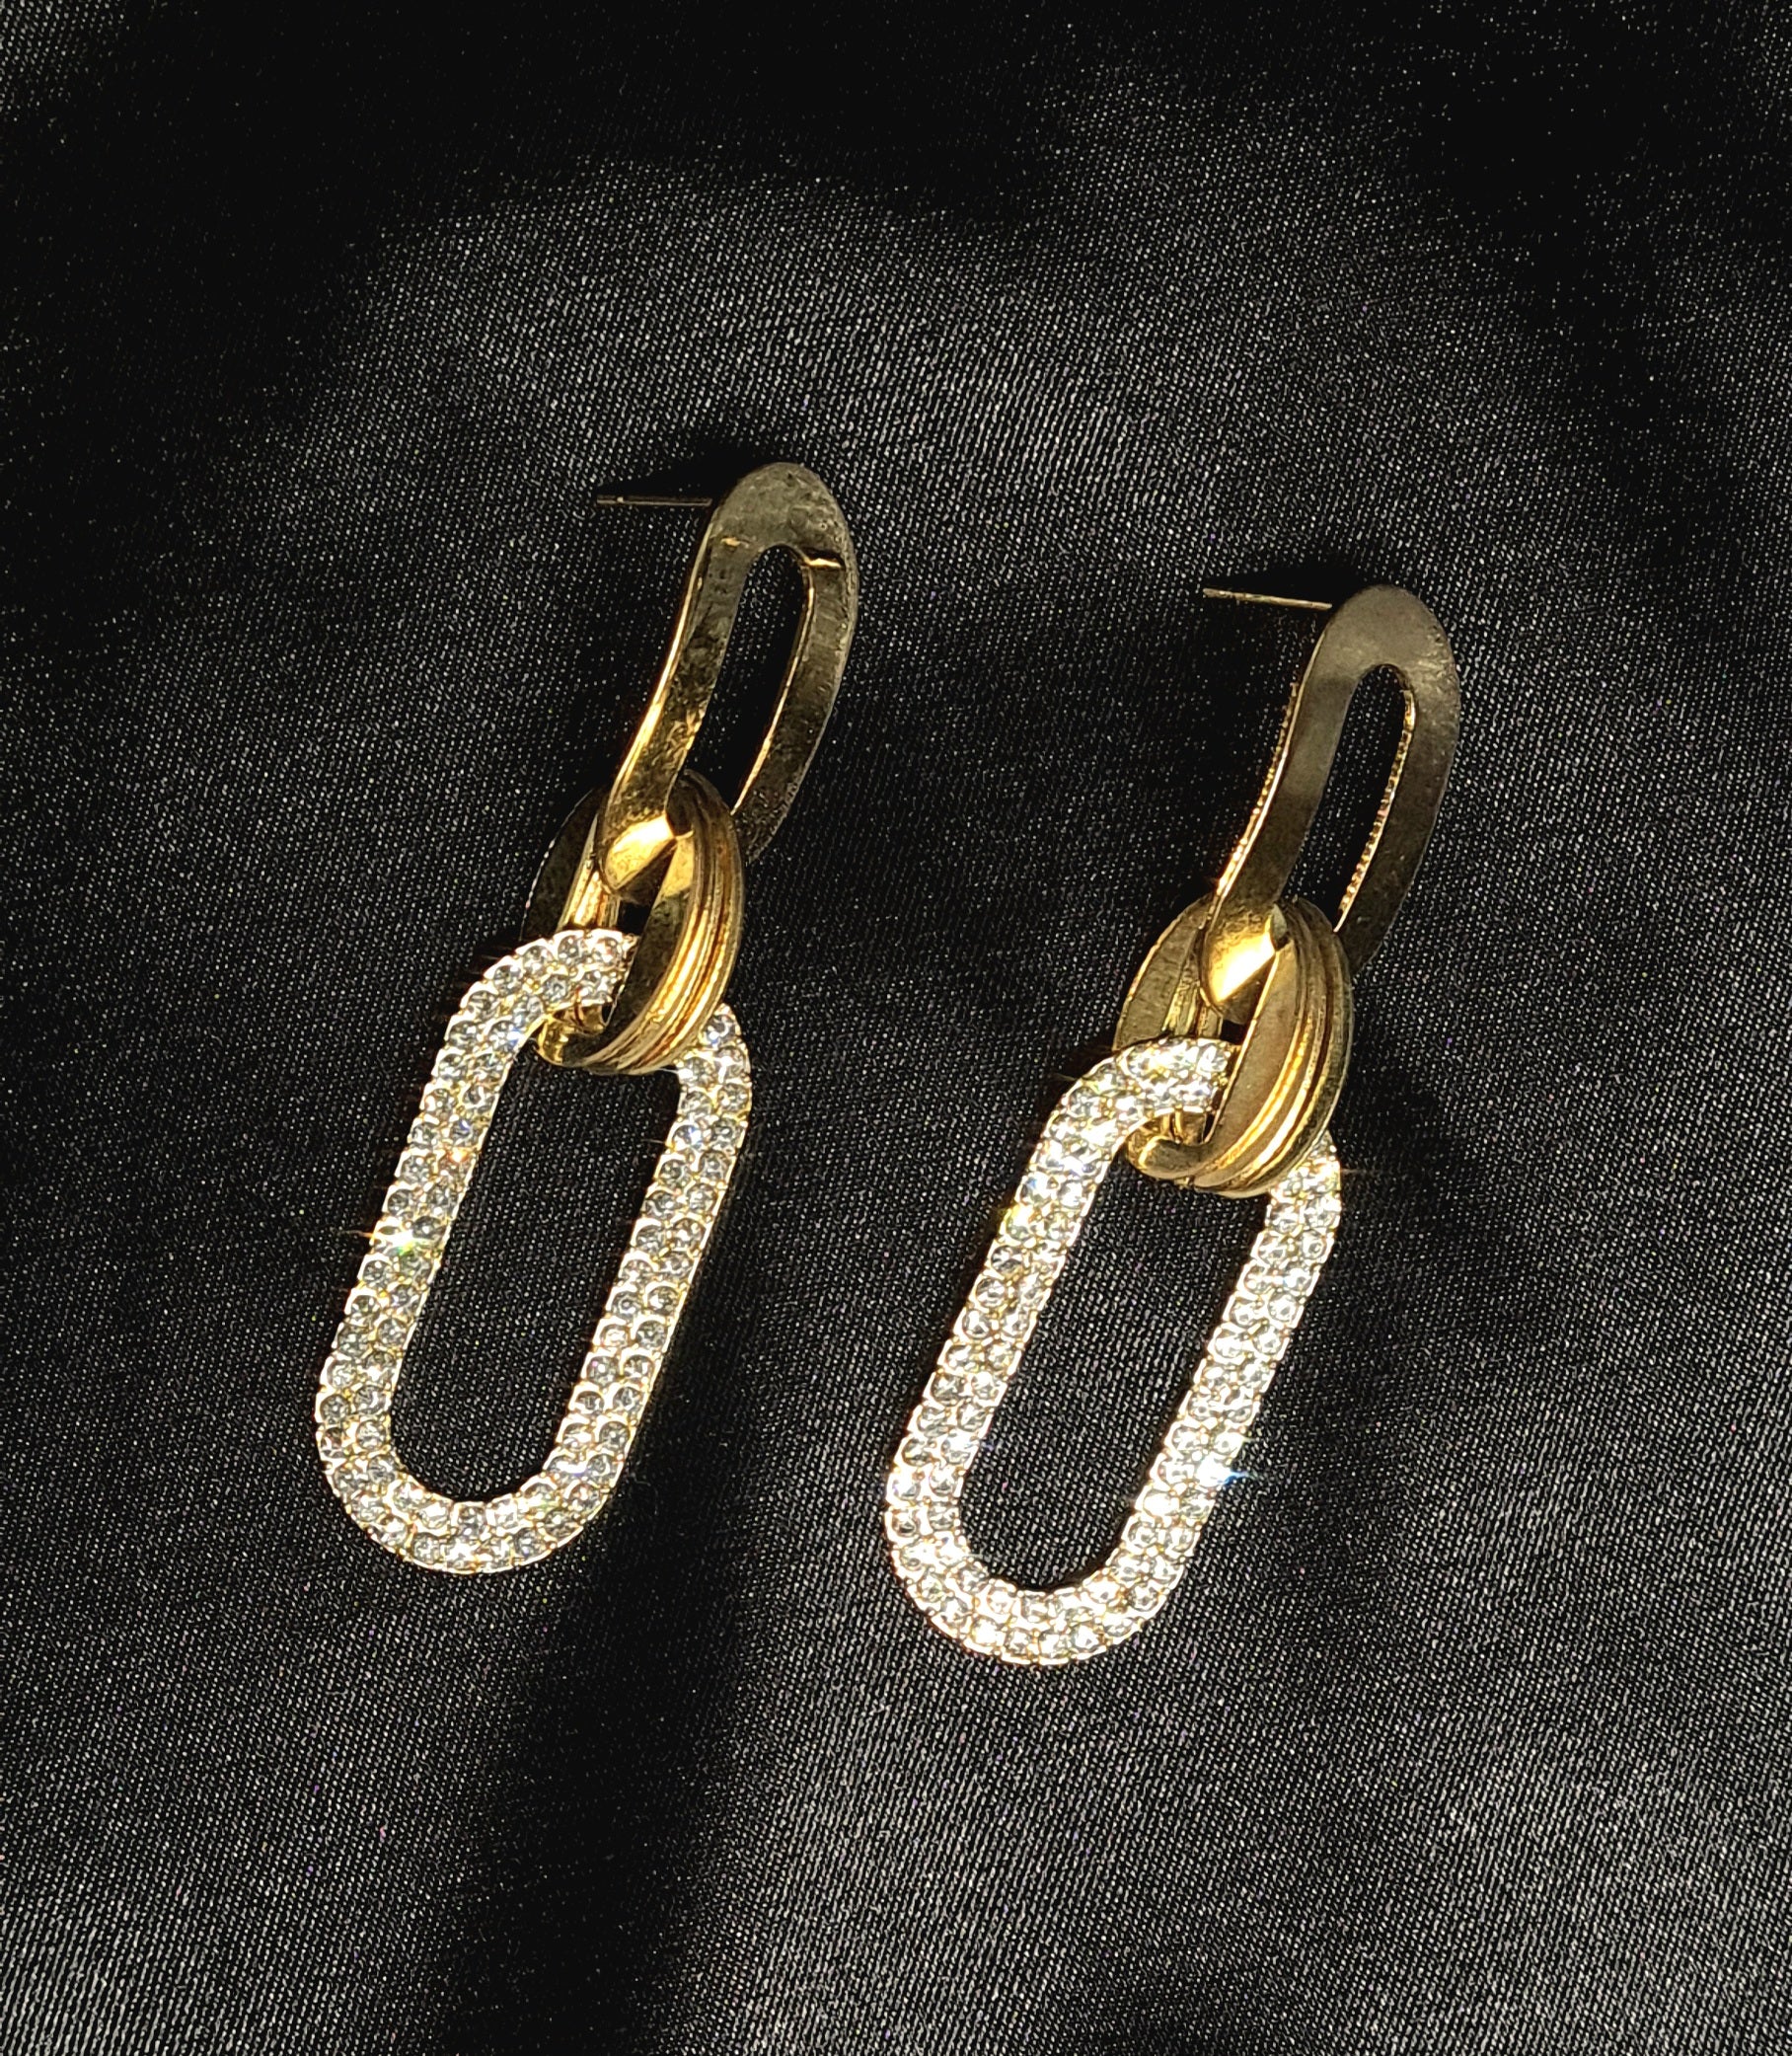 A pair of gold earrings with rhinestones on a black background. The earrings are teardrop-shaped with a gold border. The rhinestones are clear and round. The background is a black velvet cloth.